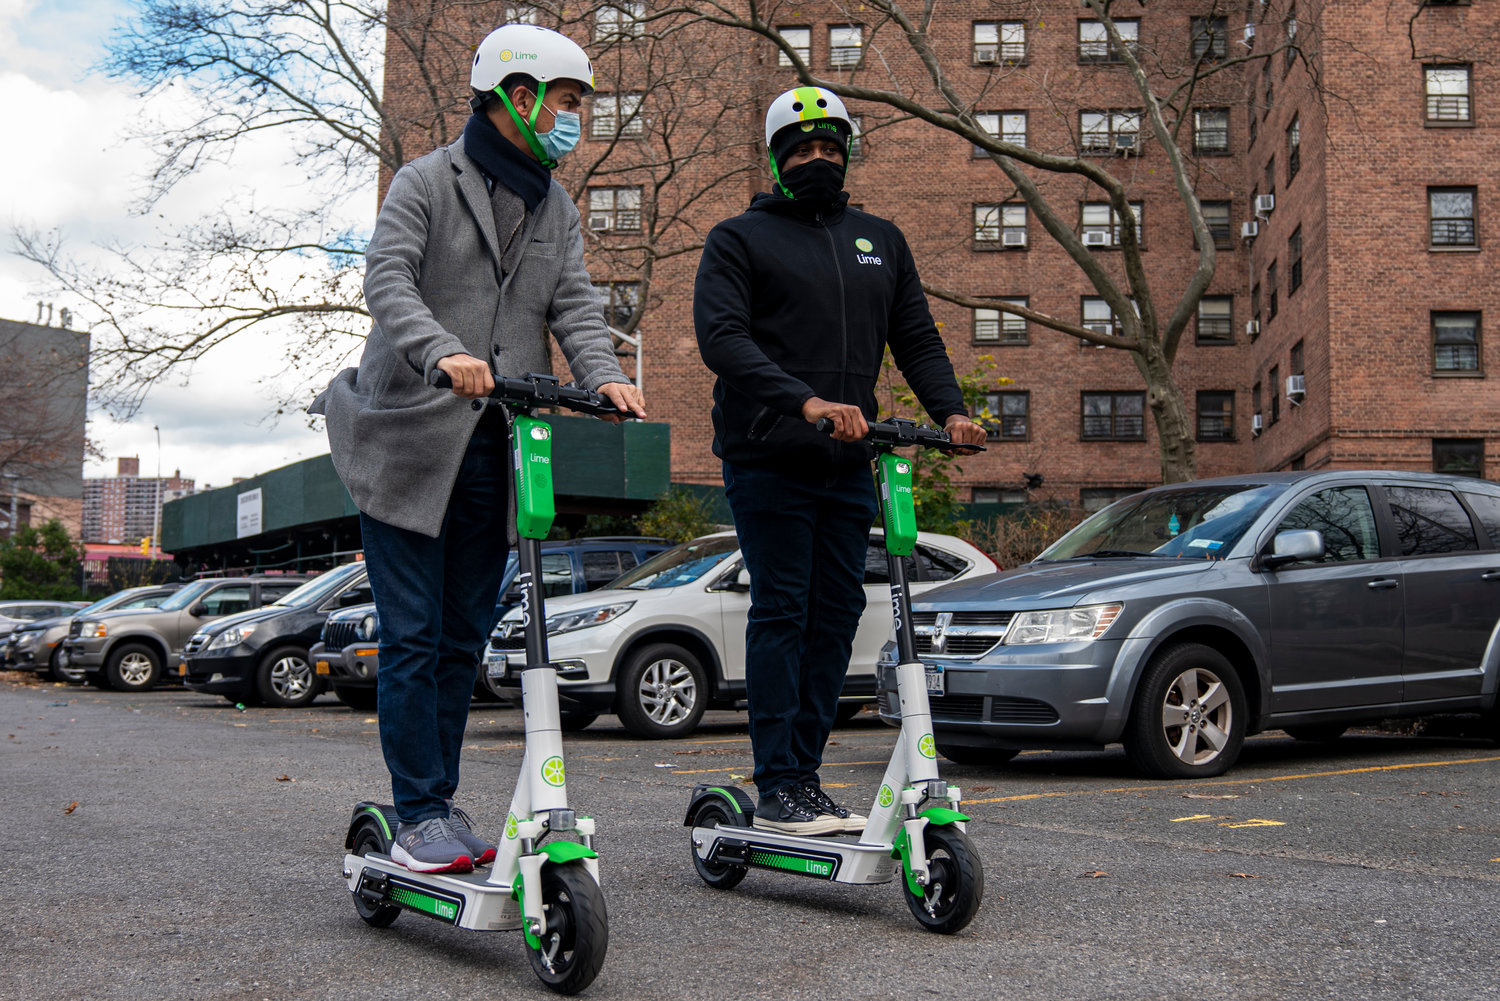 Electric scooters could soon make their way to the northwest Bronx as part of a pilot program. Councilman Ydanis Rodriguez — who’s also the city council’s transportation committee chair — hosted an e-scooter demonstration recently at the Marble Hill Houses Community Center to introduce the potential new way of getting around.